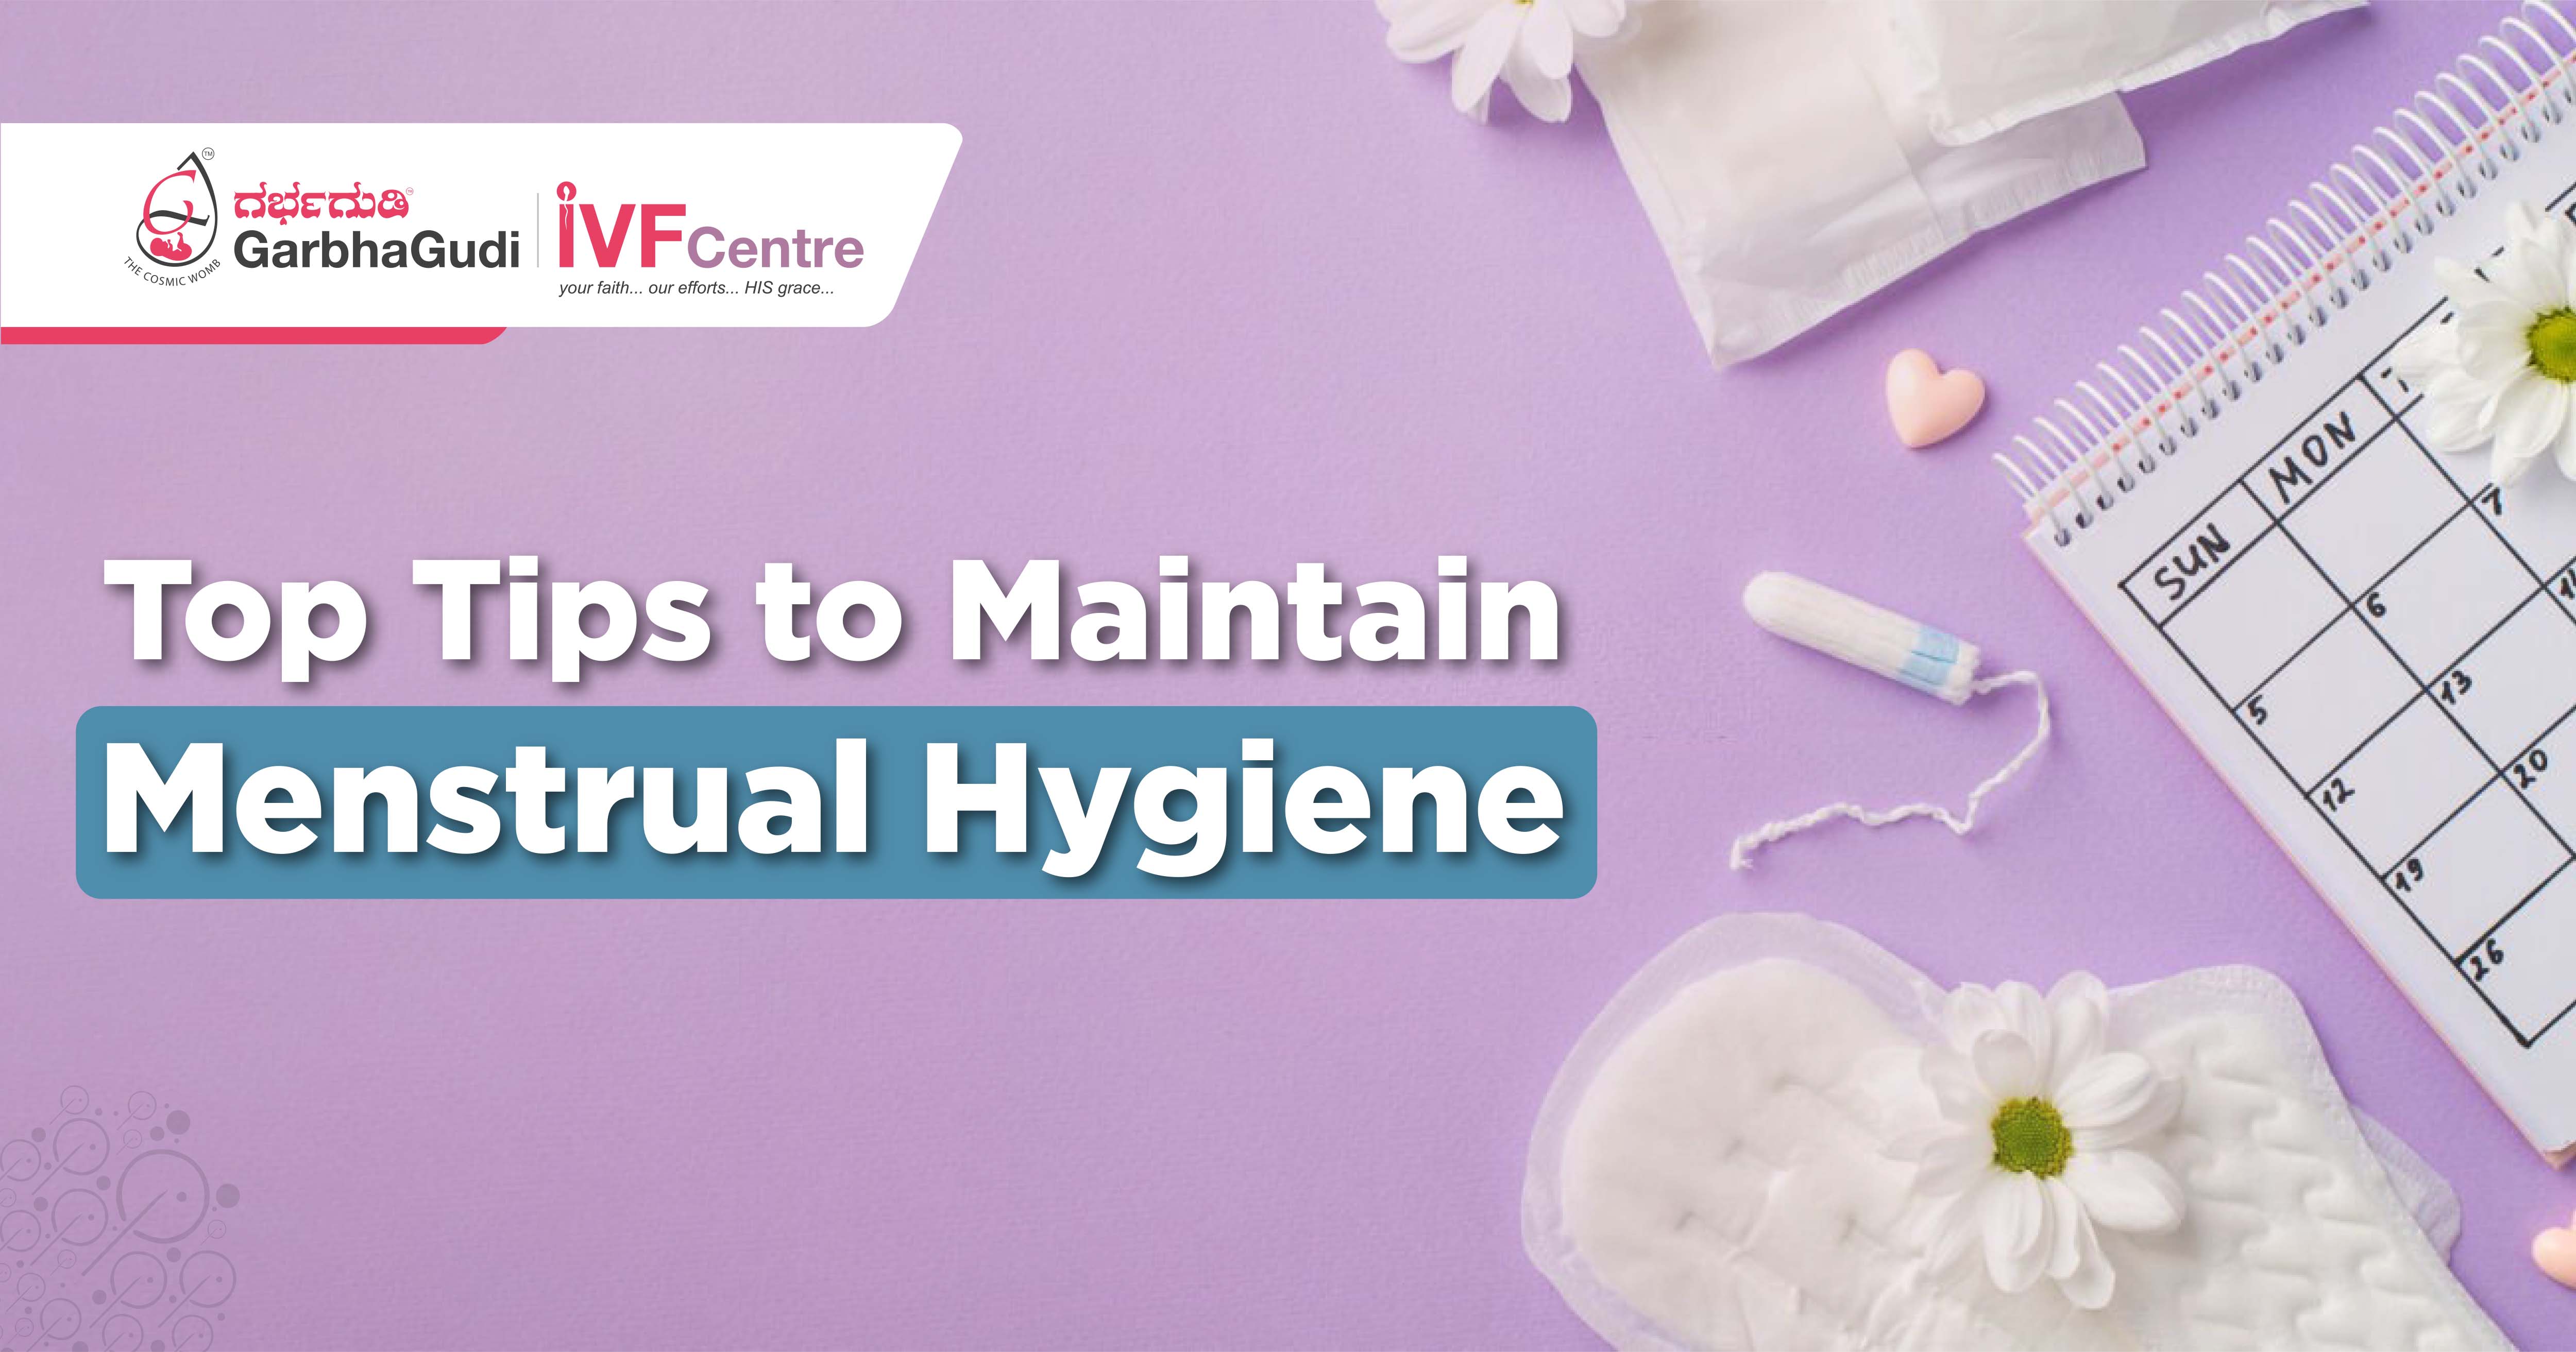 Top Tips to Maintain Menstrual Hygiene